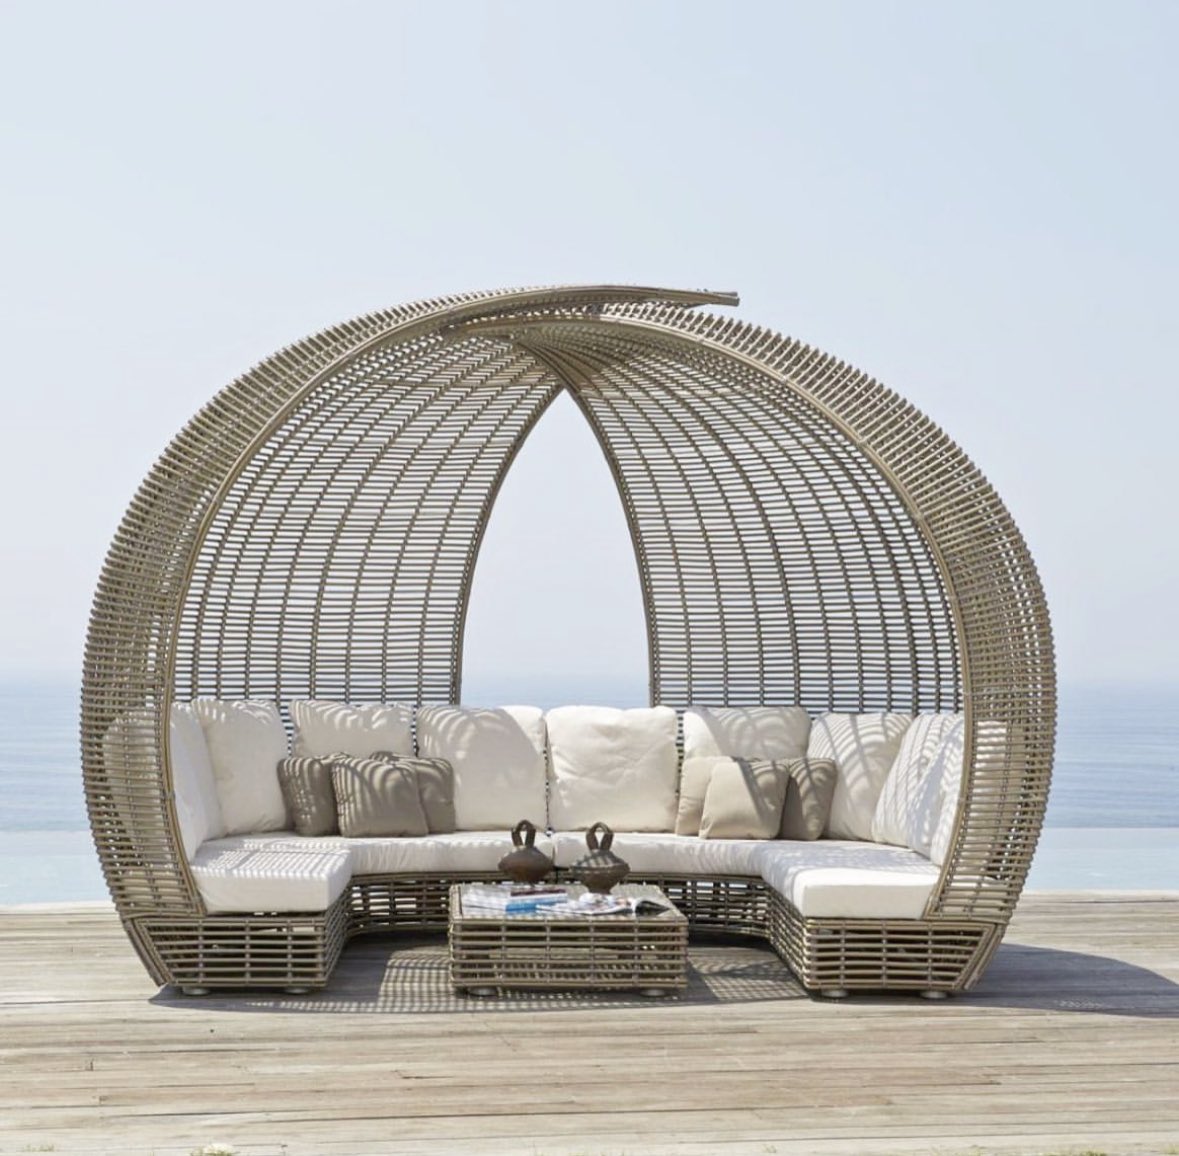 Meet you here for a 🍸

The stunning Sparta Daybed by Skyline Design.  Give your garden that WOW factor!! 

Norfolkluxuryfurniture.com

#skylinedesign #luxury #garden #furniture #luxurygarden #interior #gardeninspiration #garden #gardendesign #exteriordesign #luxuryhomes